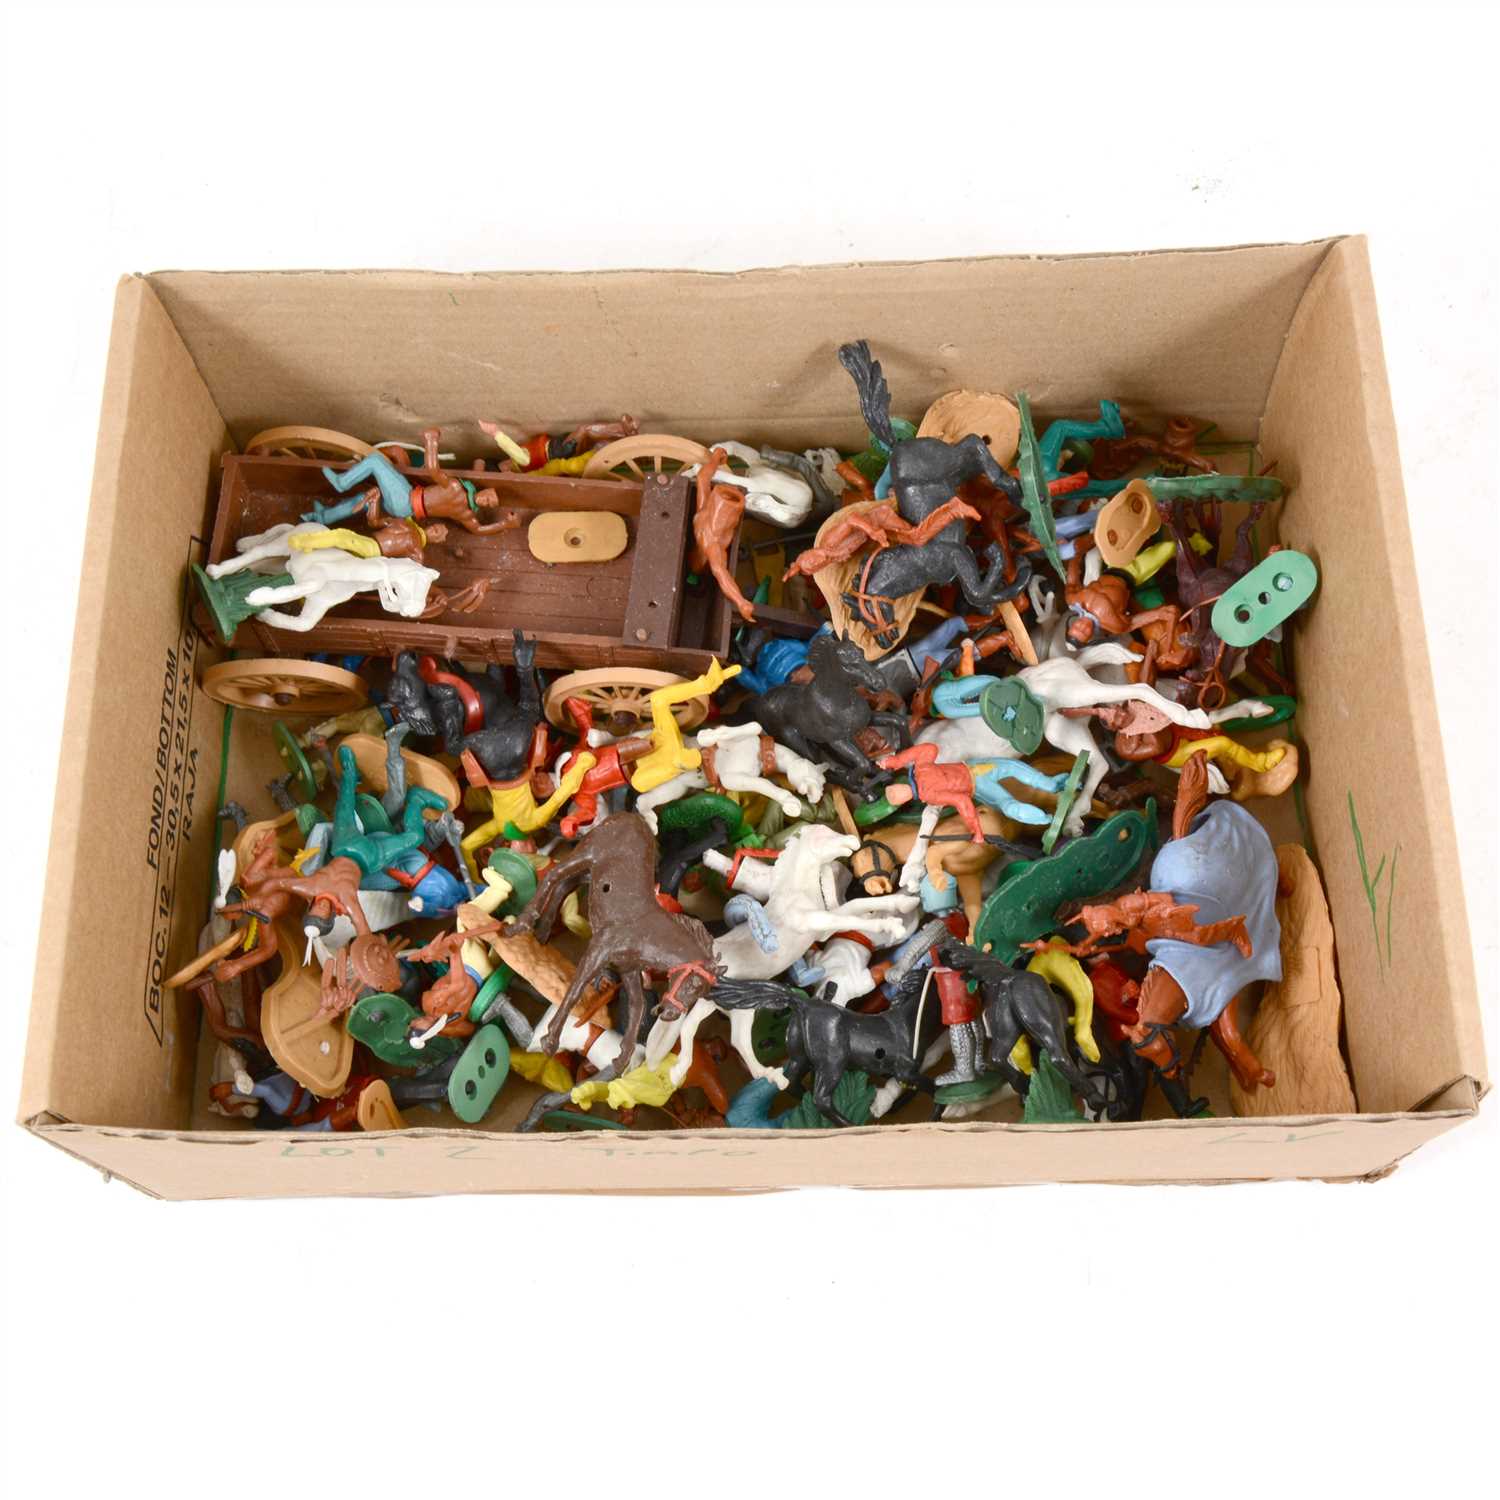 Lot 130 - AMENDMENT - THERE ARE TIMPO AND OTHER MAKERS IN THIS LOT NOT JUST TIMPO, Timpo Toys plastic figures; one box of Cowboy figures, horses, drawn cart, Native Americans, etc.